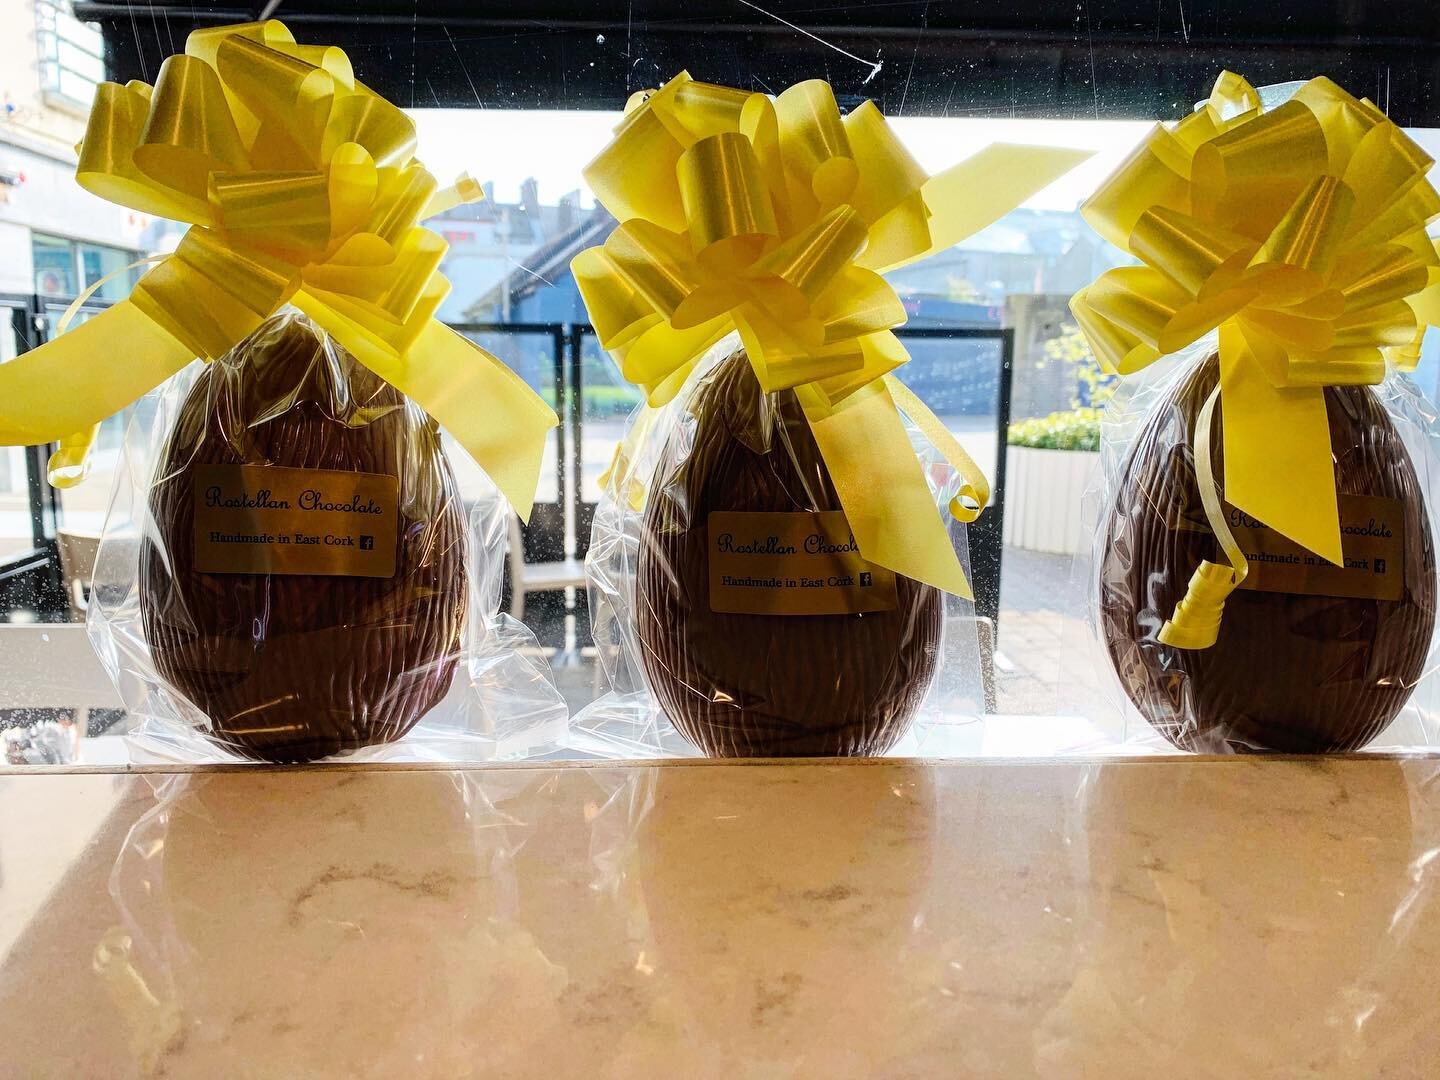 We have a limited supply of @rostellan_chocolate Easter Eggs - Handmade locally by Peter in Rostellan these are a must have gift this Easter . #easter #eastereggs #localirishfood #shoplocal #midleton #eastcorkfood